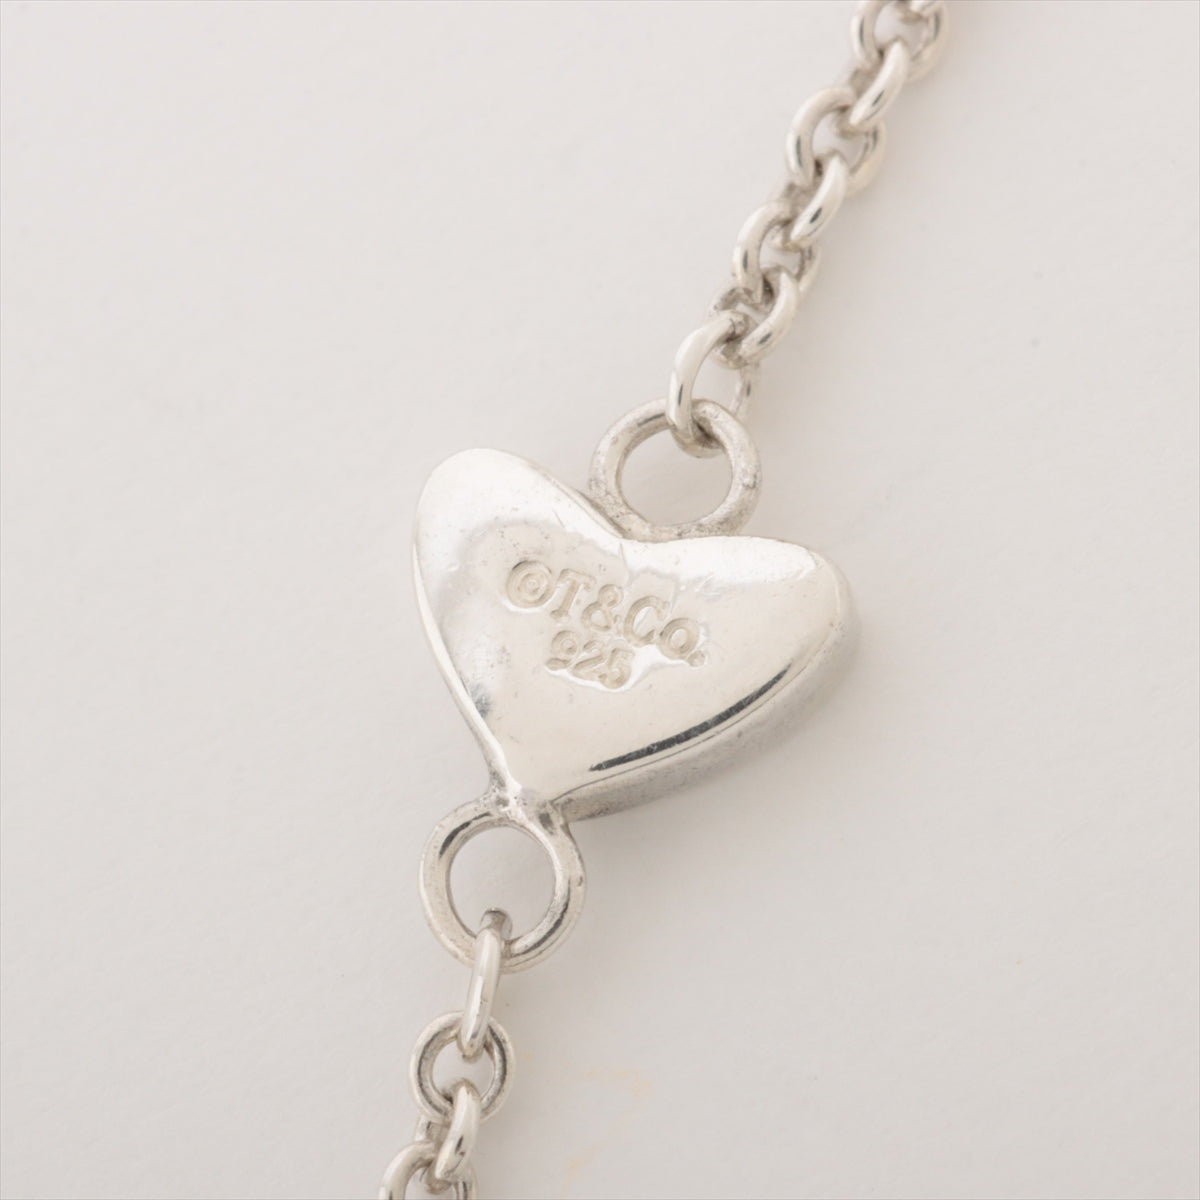 Tiffany Open Heart Lariat Necklace 925 8.4g Silver